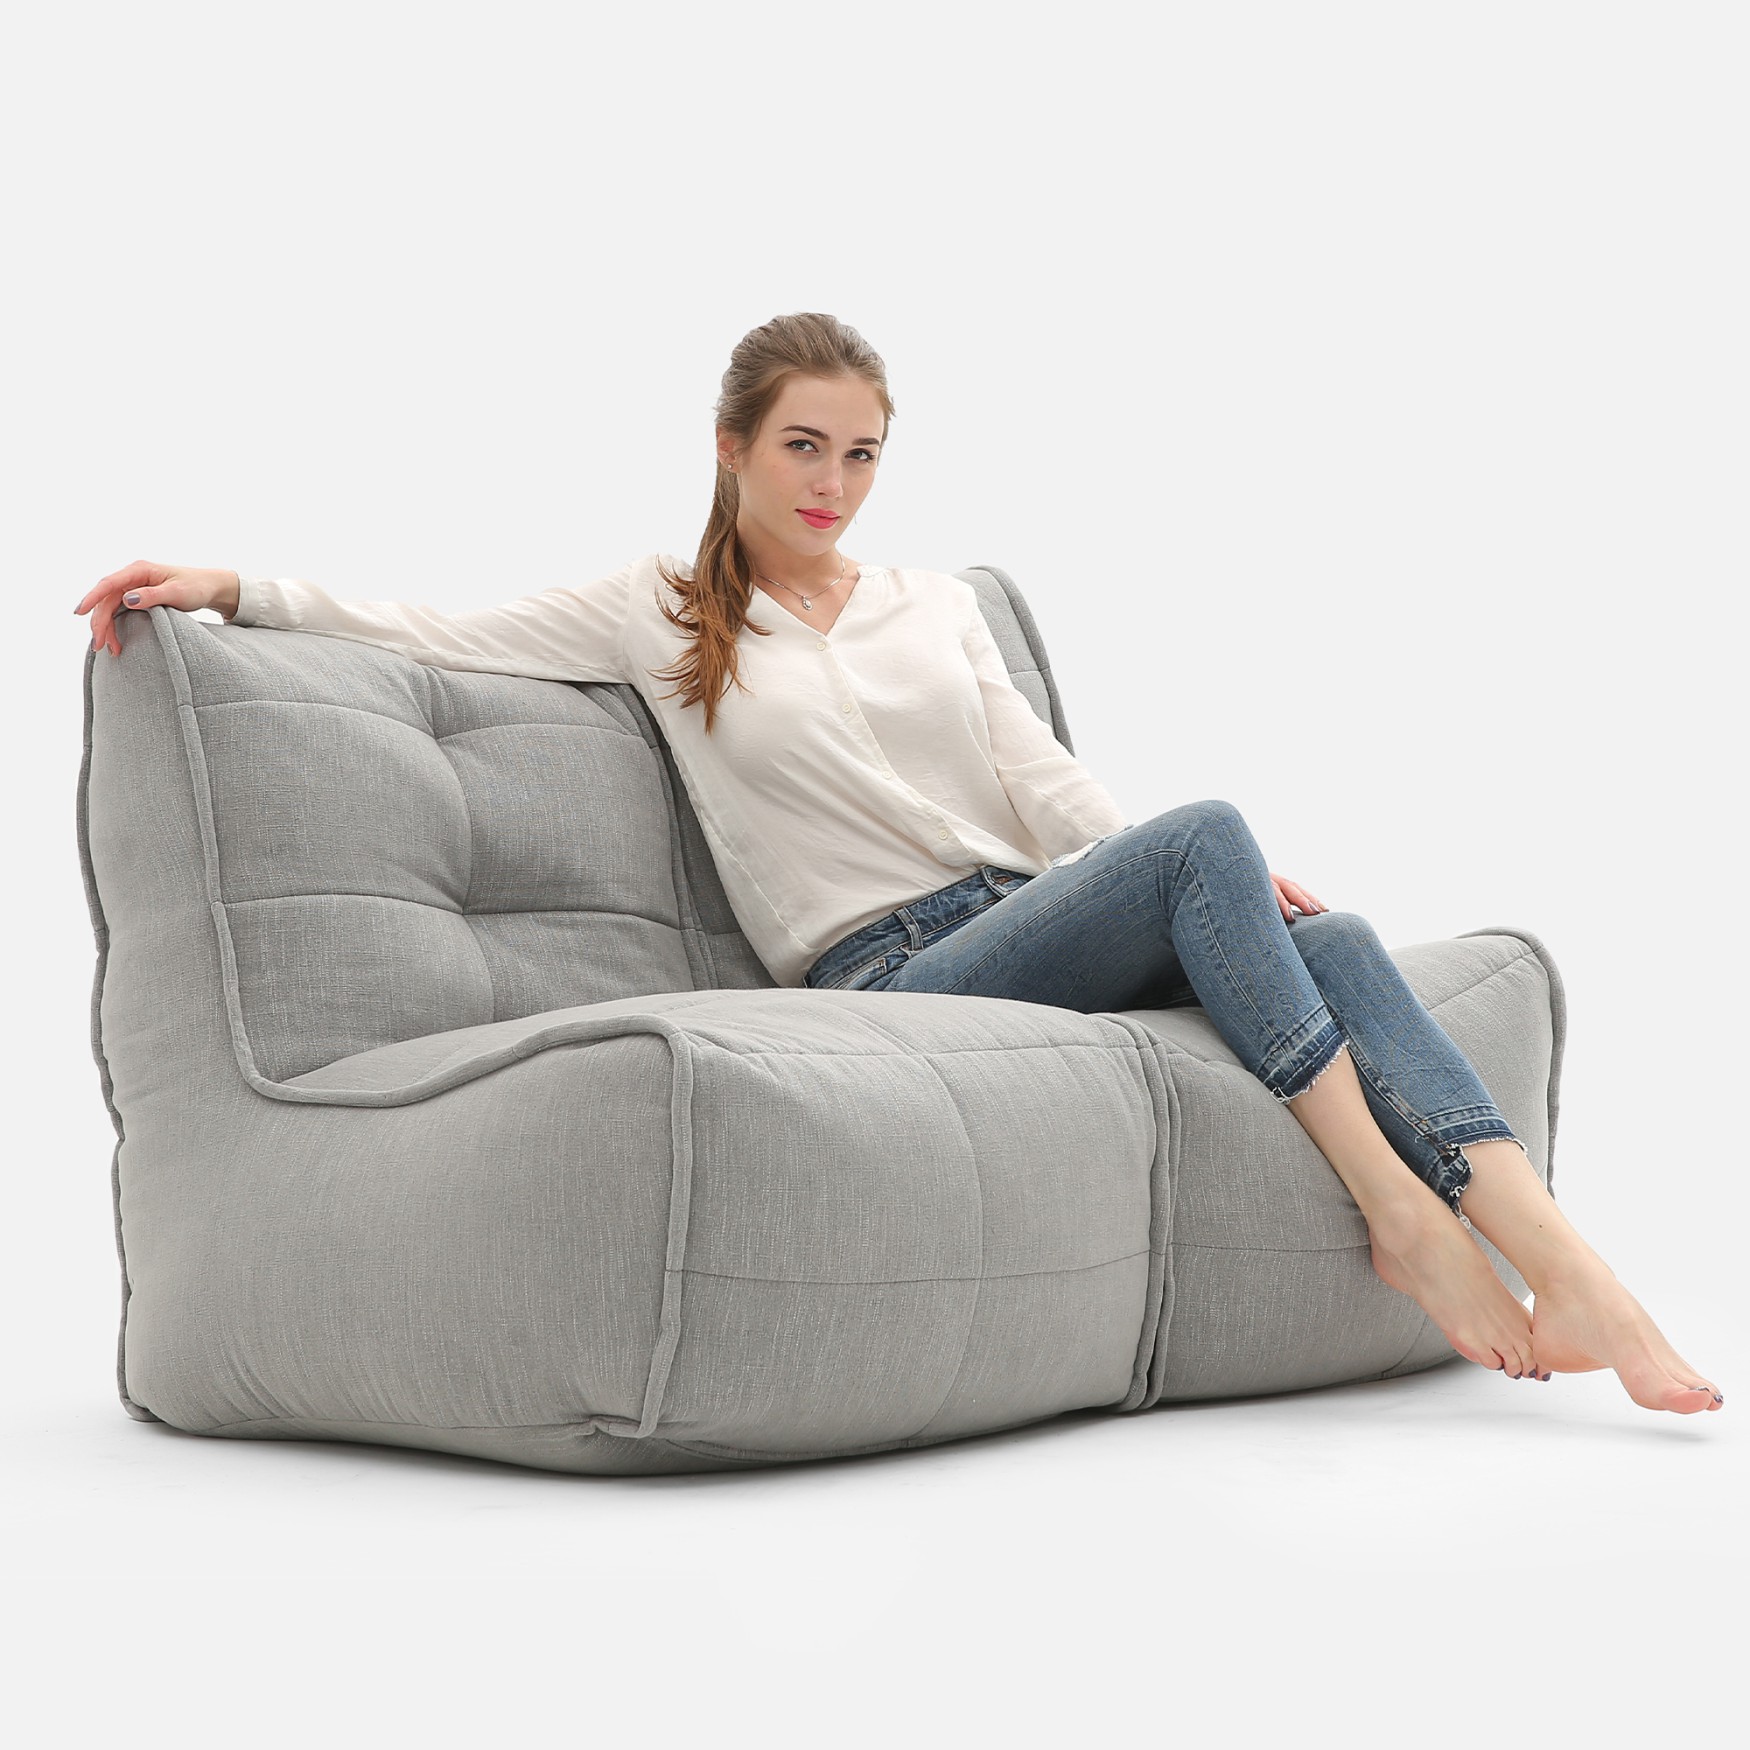 ambient lounge twin couch keystone grey